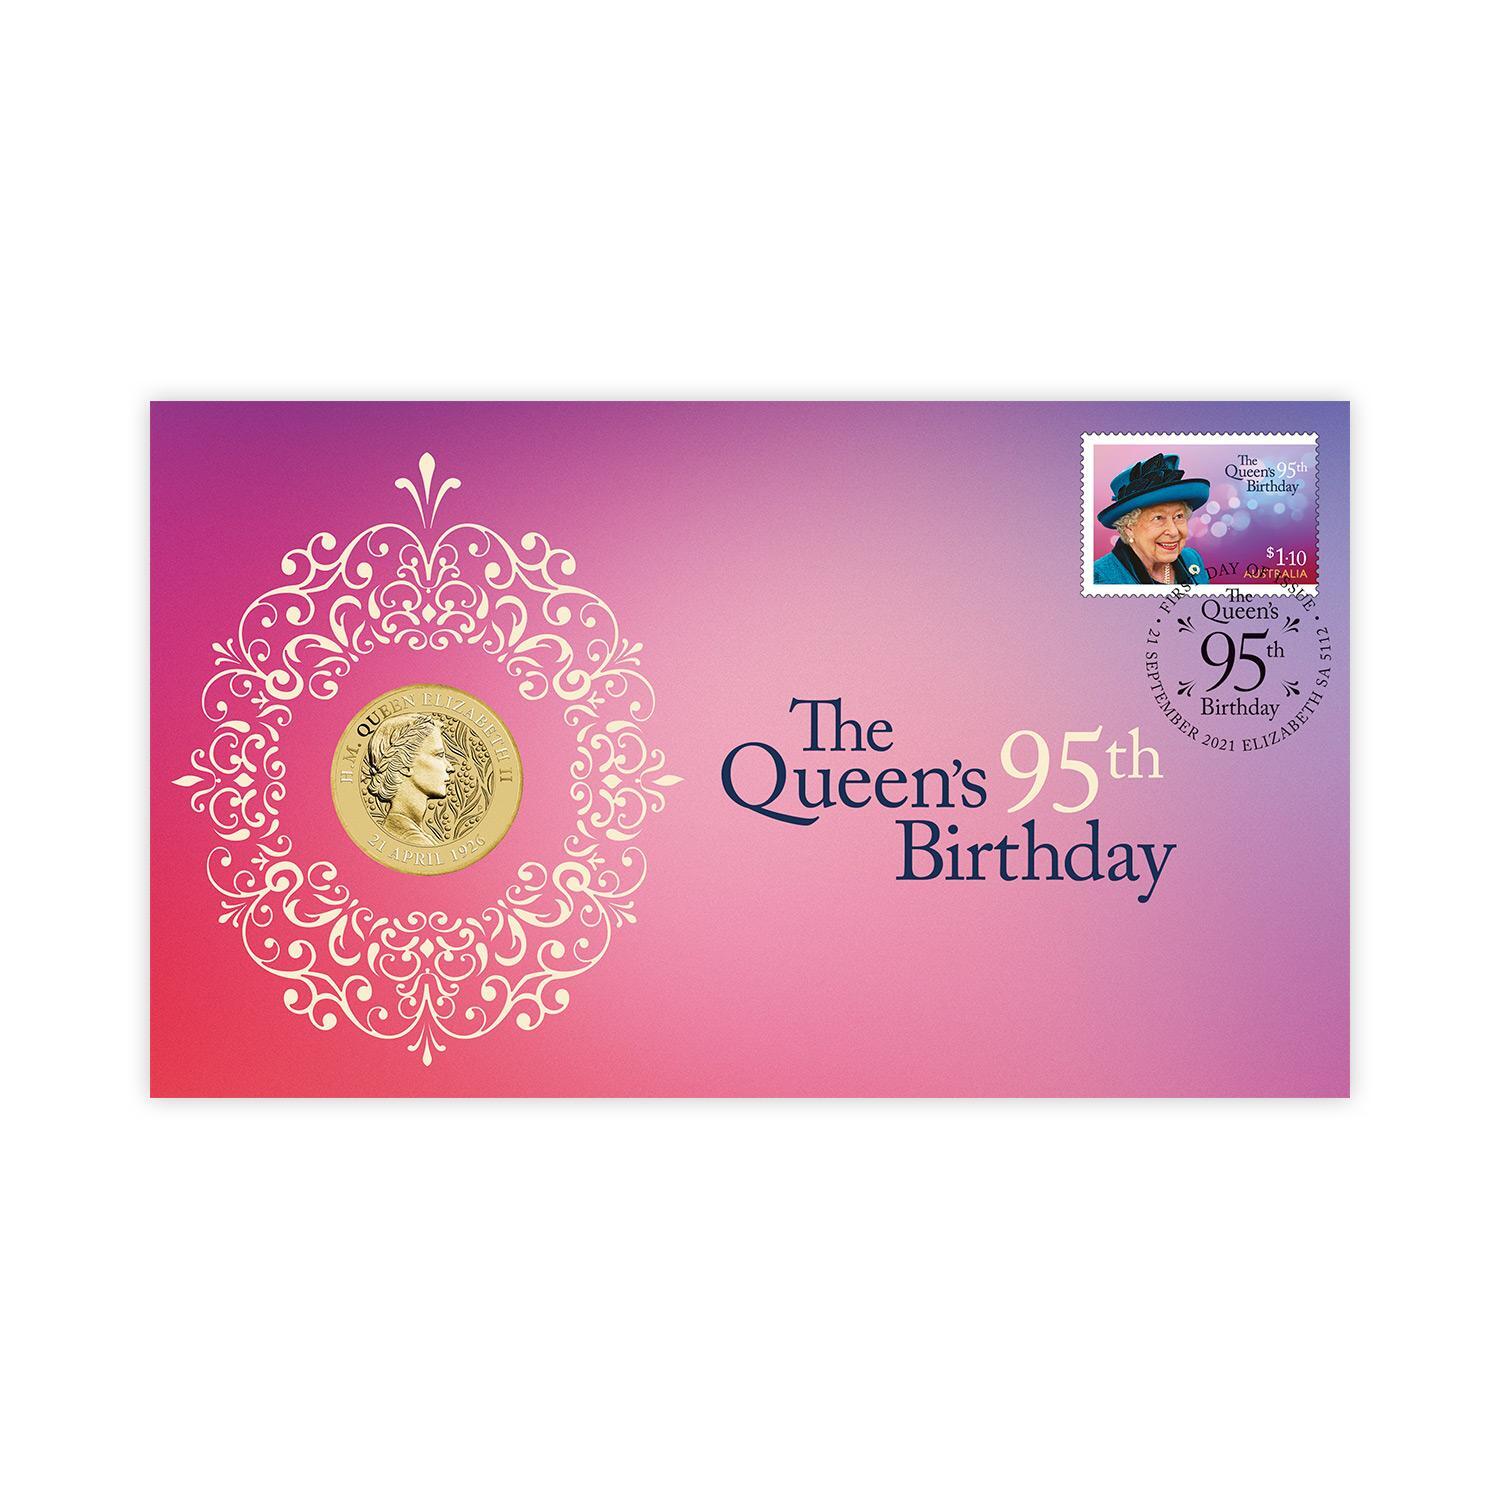 2021 The Queen's 95th Birthday PNC